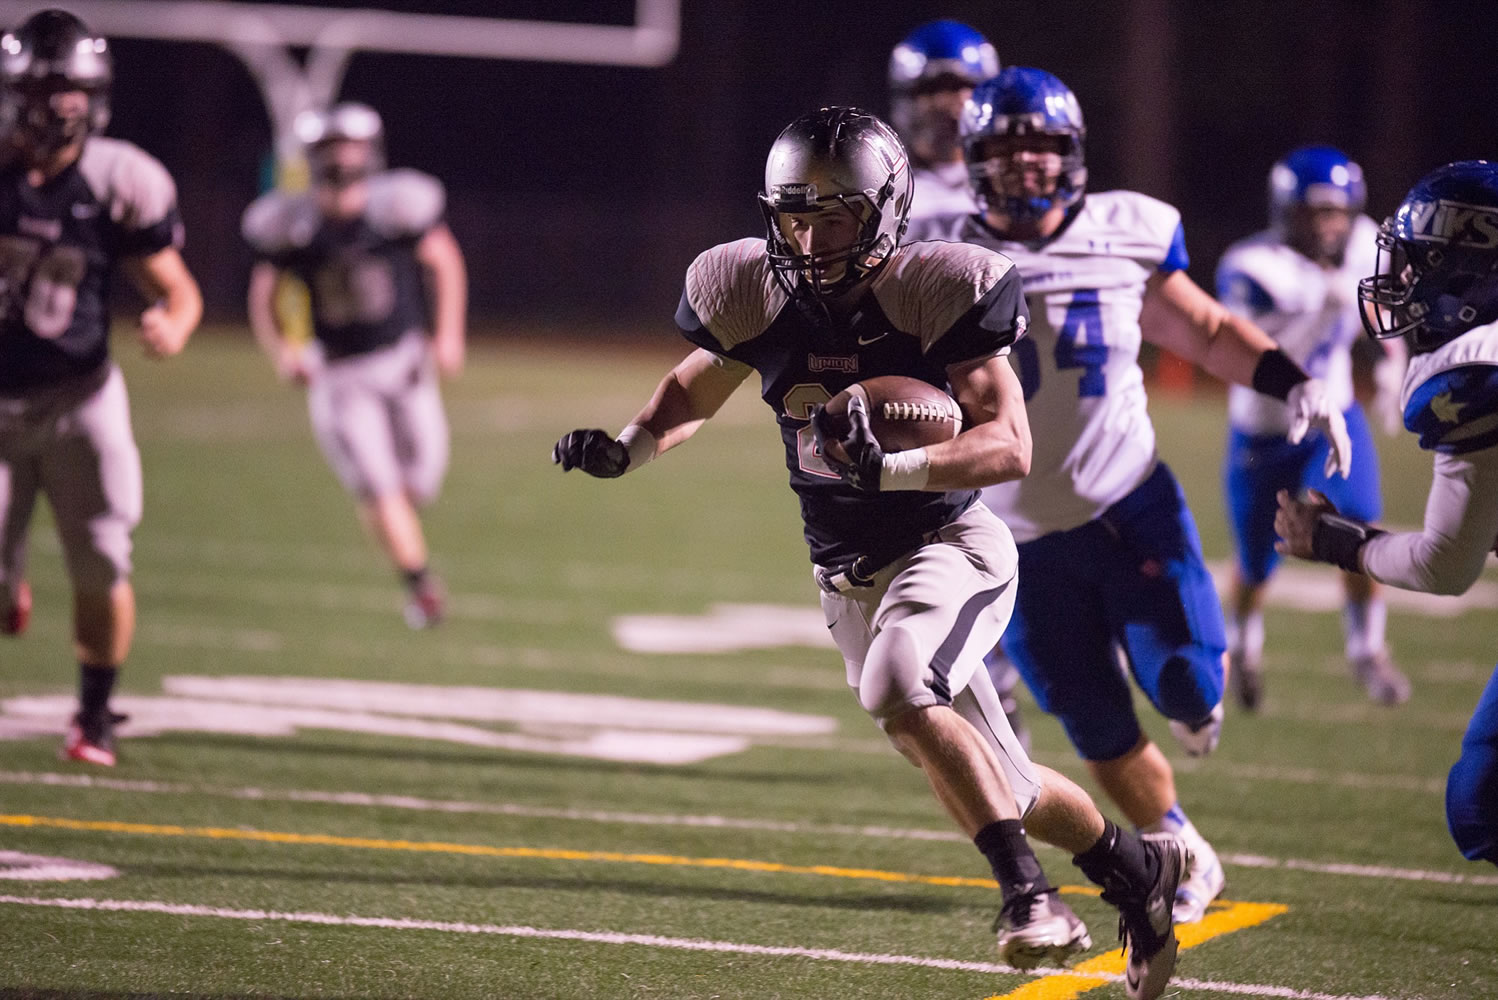 Union's Caleb Browning rushed for 134 yards and three touchdowns against Curtis.